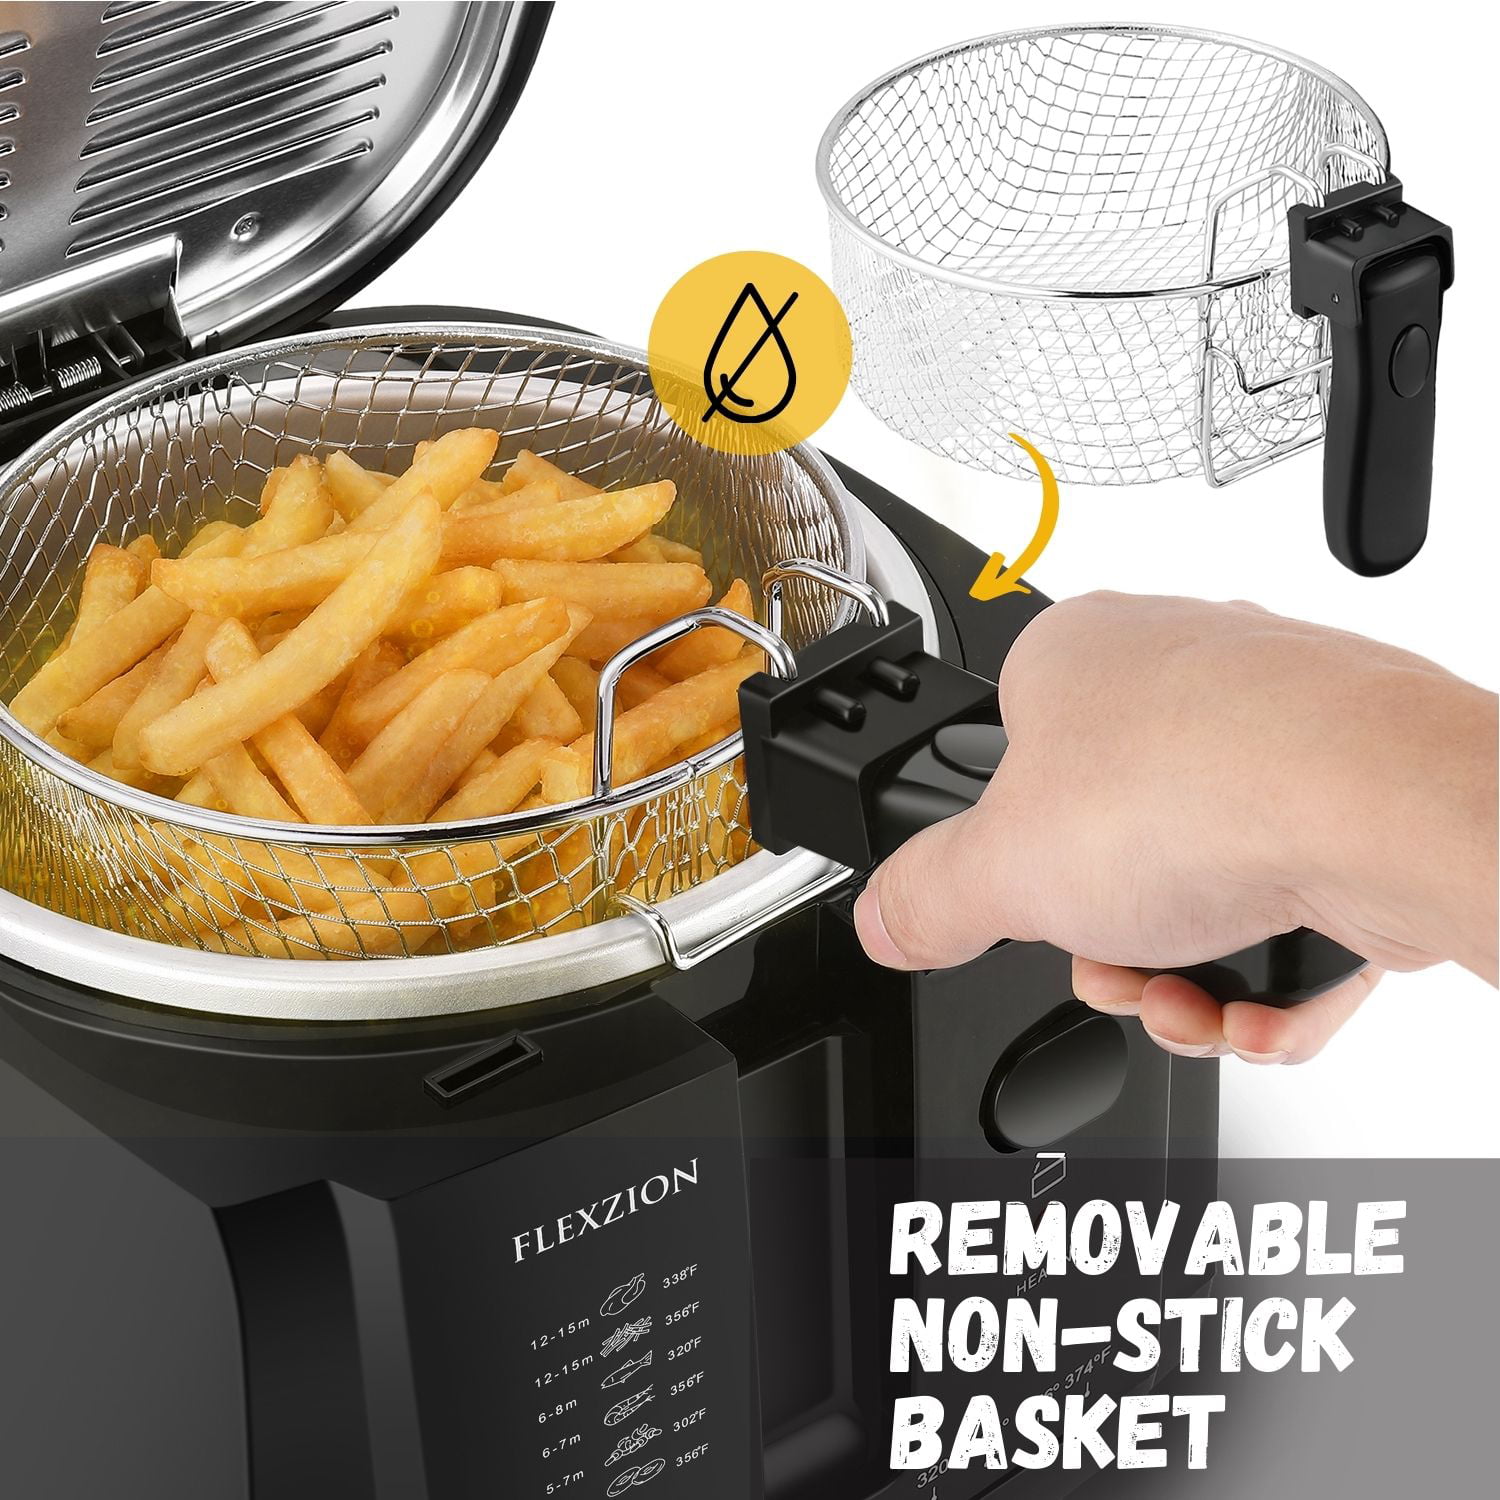  ORALNER Deep Fryer with Basket, Electric Deep Frying 12 Cups  Oil Fryer w/View Window, Cool Touch Handle, Timer, Adjustable Temperature  Home Deep Fat Fryers, Silver (3.2 QT): Home & Kitchen